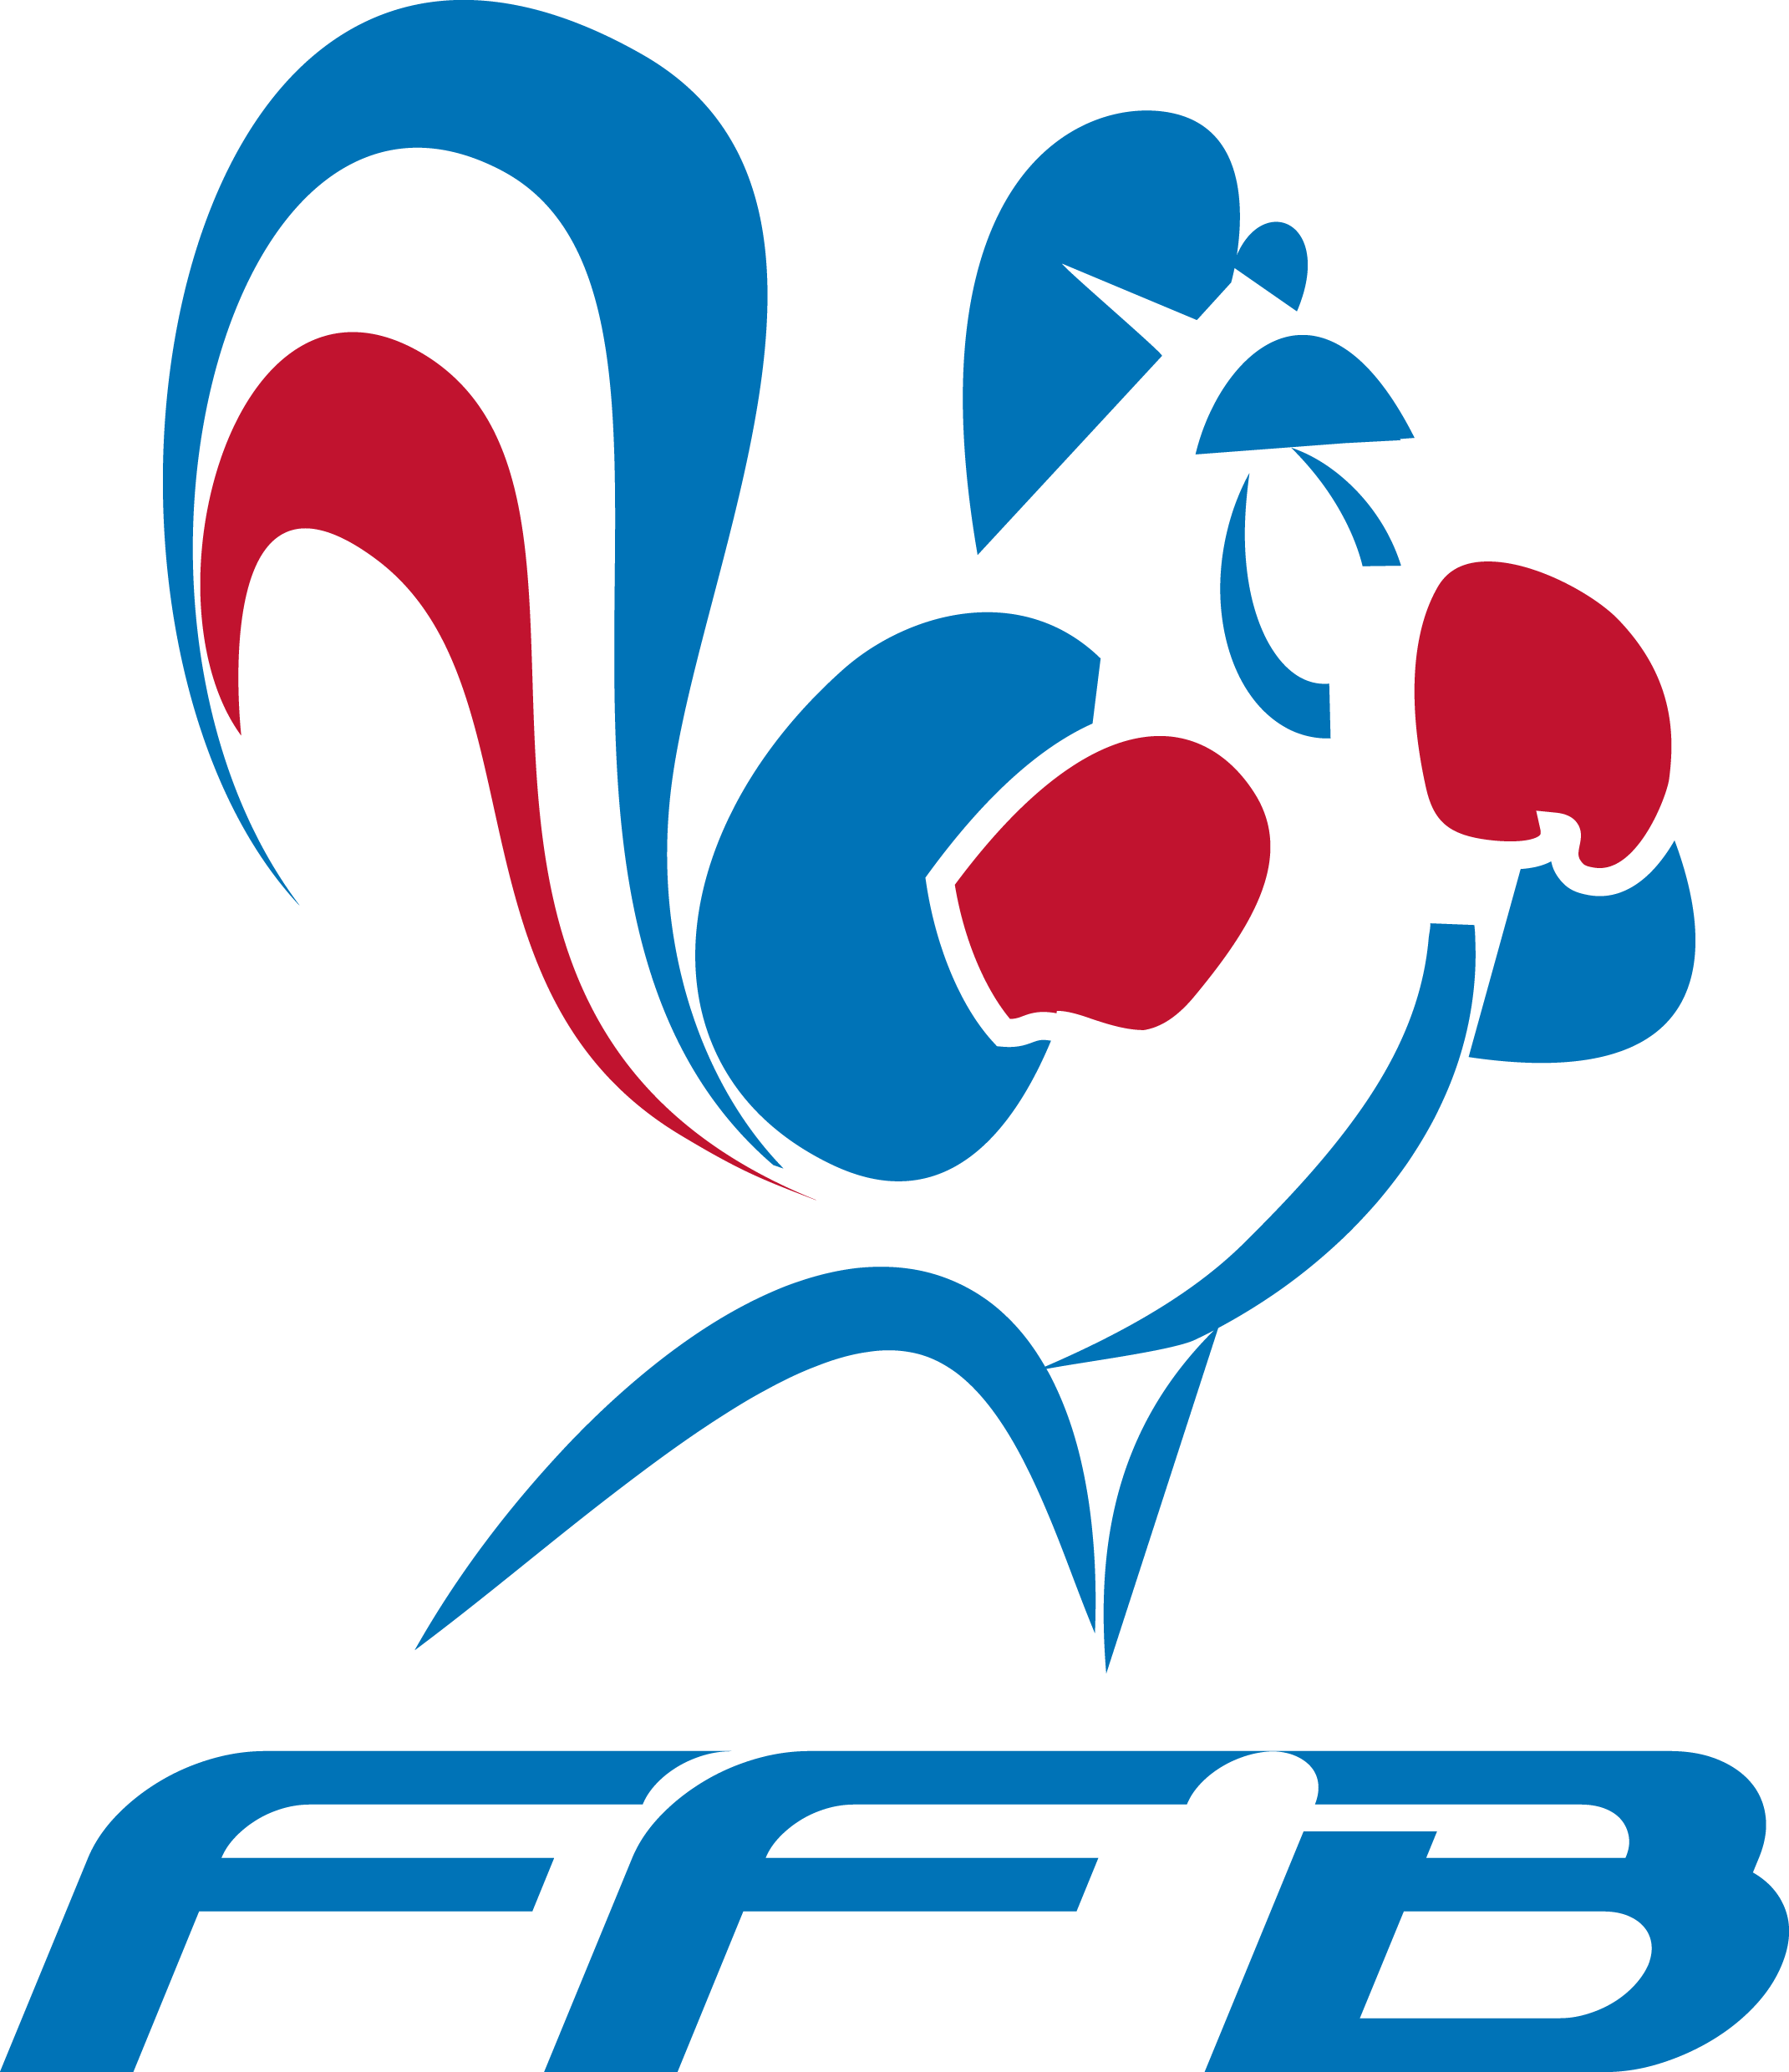 Blue Boxing Logo - The Brand New French Boxing Federation Logo - European Boxing ...